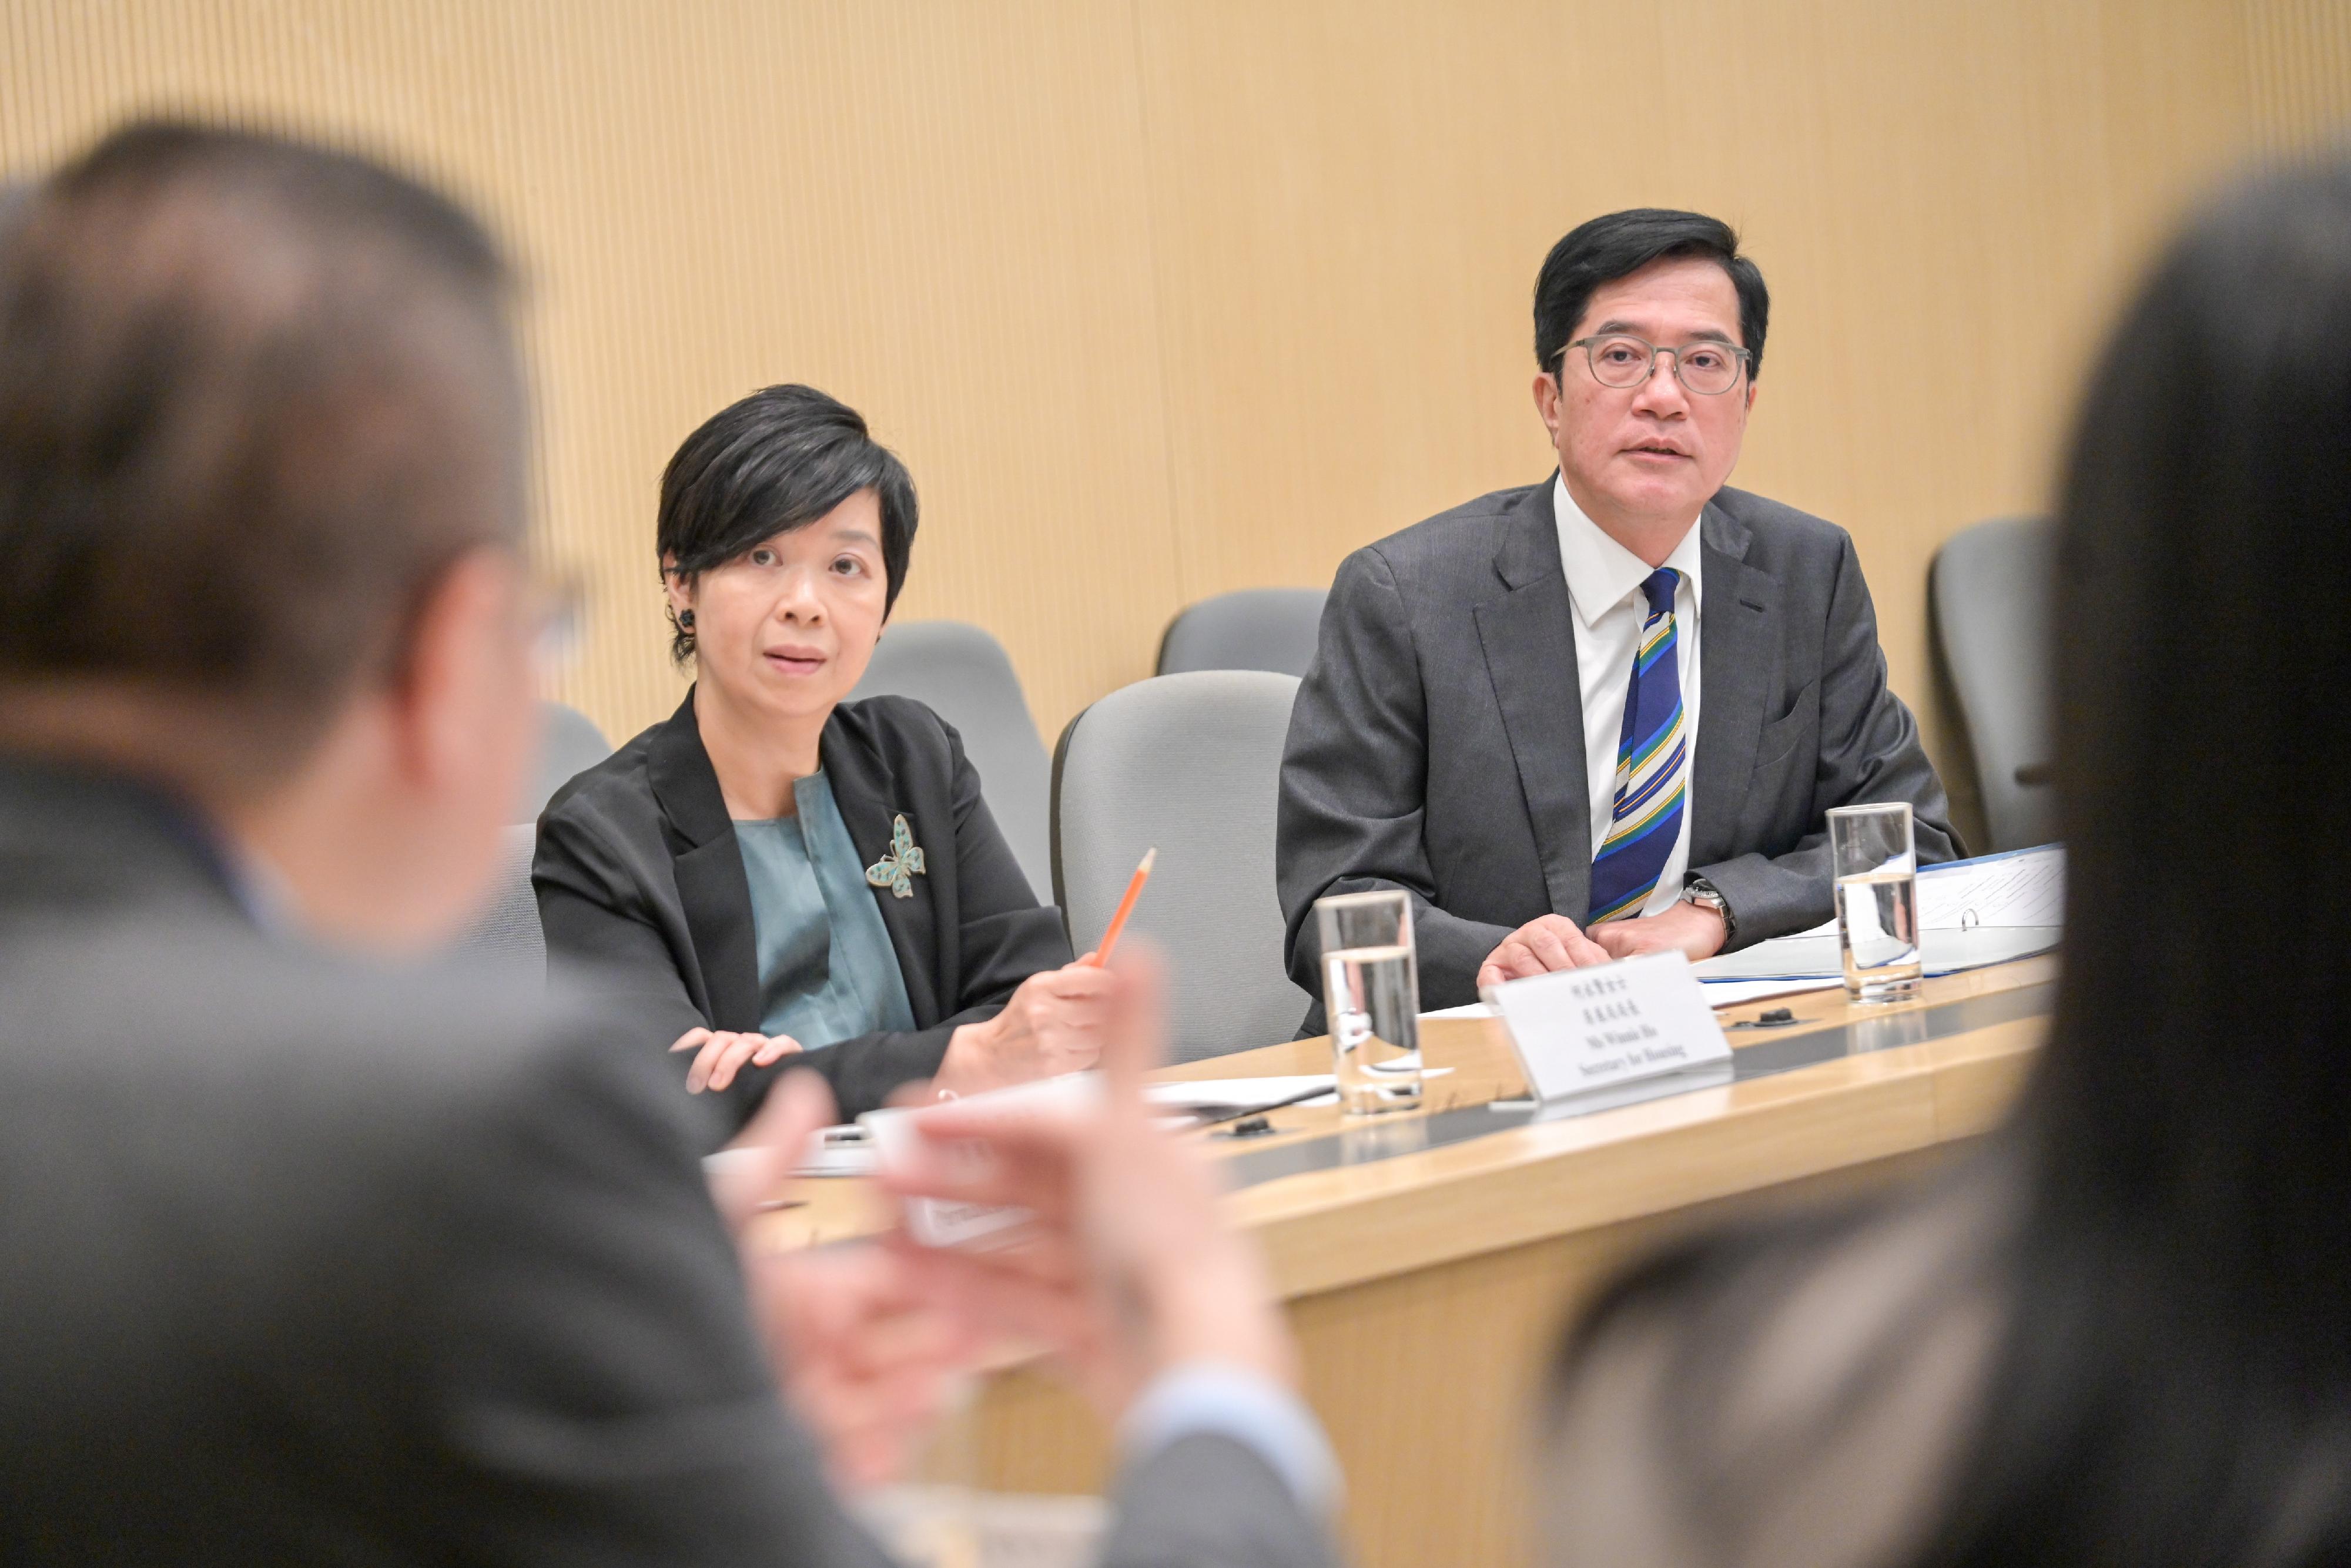 The Deputy Financial Secretary, Mr Michael Wong (right), convened the first meeting as the Head of the Task Force on Tackling the Issue of Subdivided Units today (November 3). Beside him is the Deputy Head of the Task Force and the Secretary for Housing, Ms Winnie Ho (left).